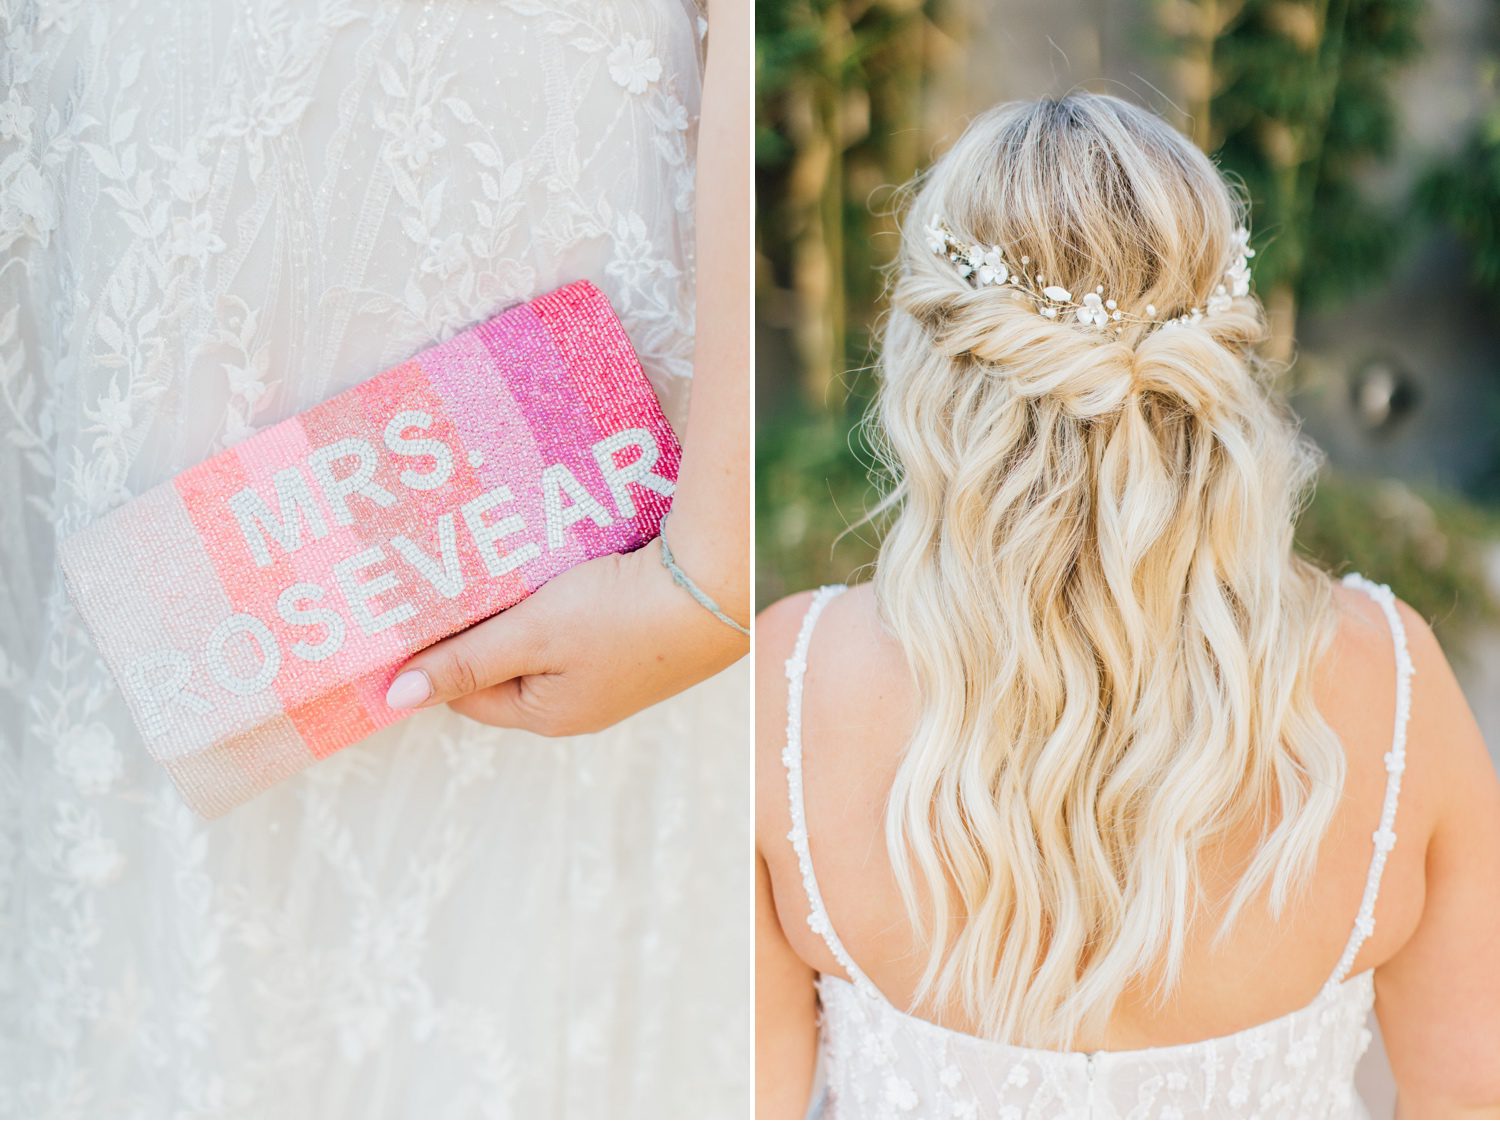 Bridal Details including wedding hair and purse.